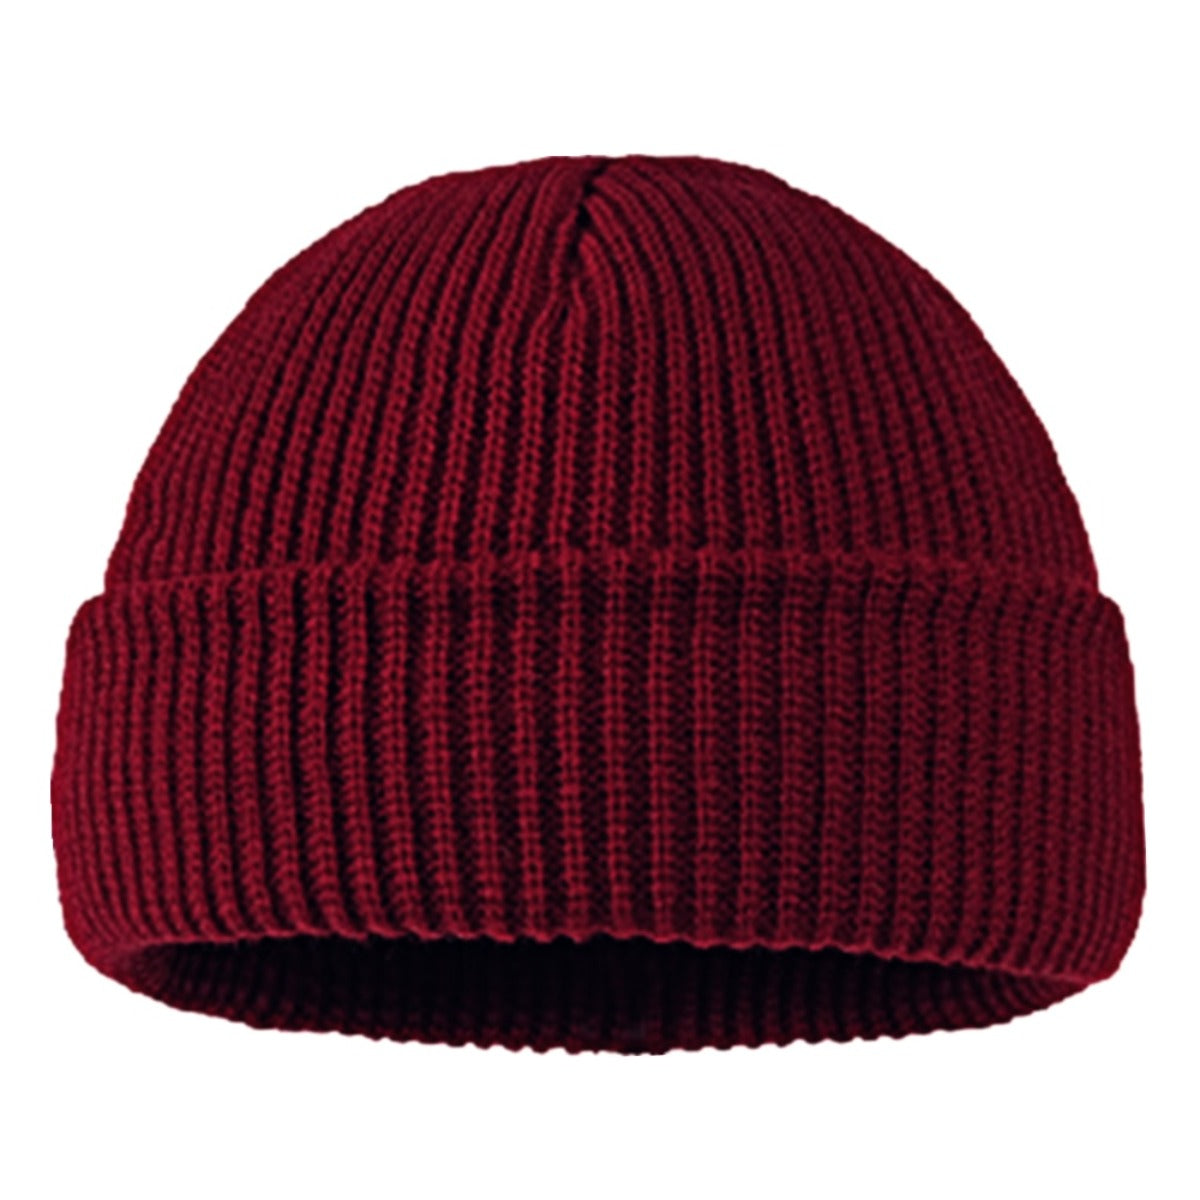 A wool knitted skull cap beanie on a white background, perfect for winter.